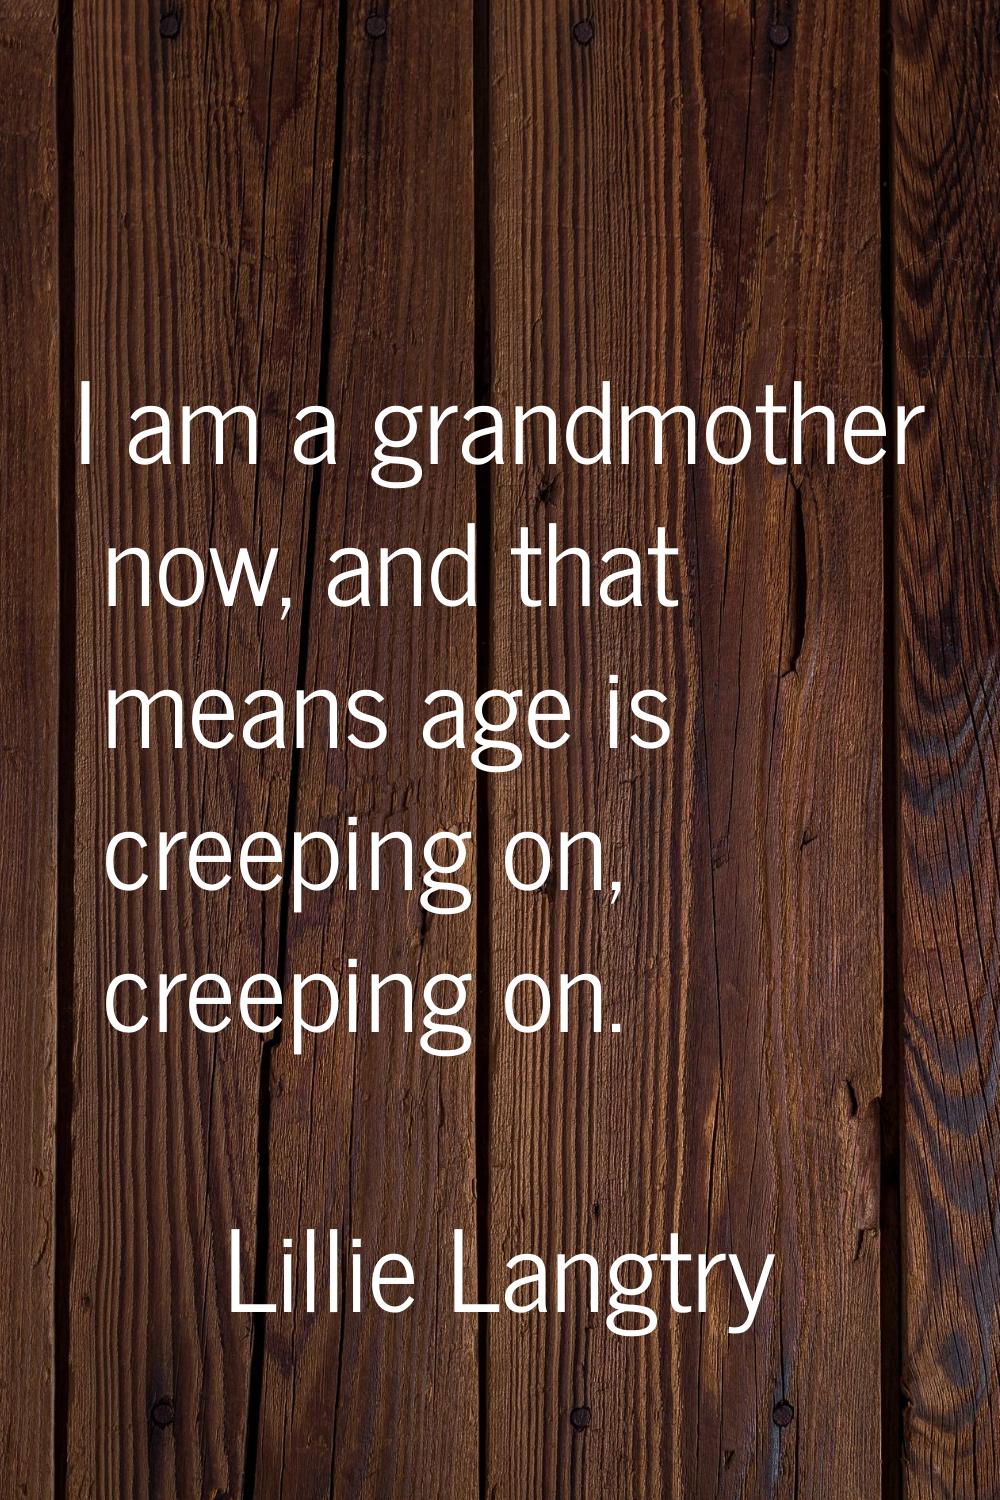 I am a grandmother now, and that means age is creeping on, creeping on.